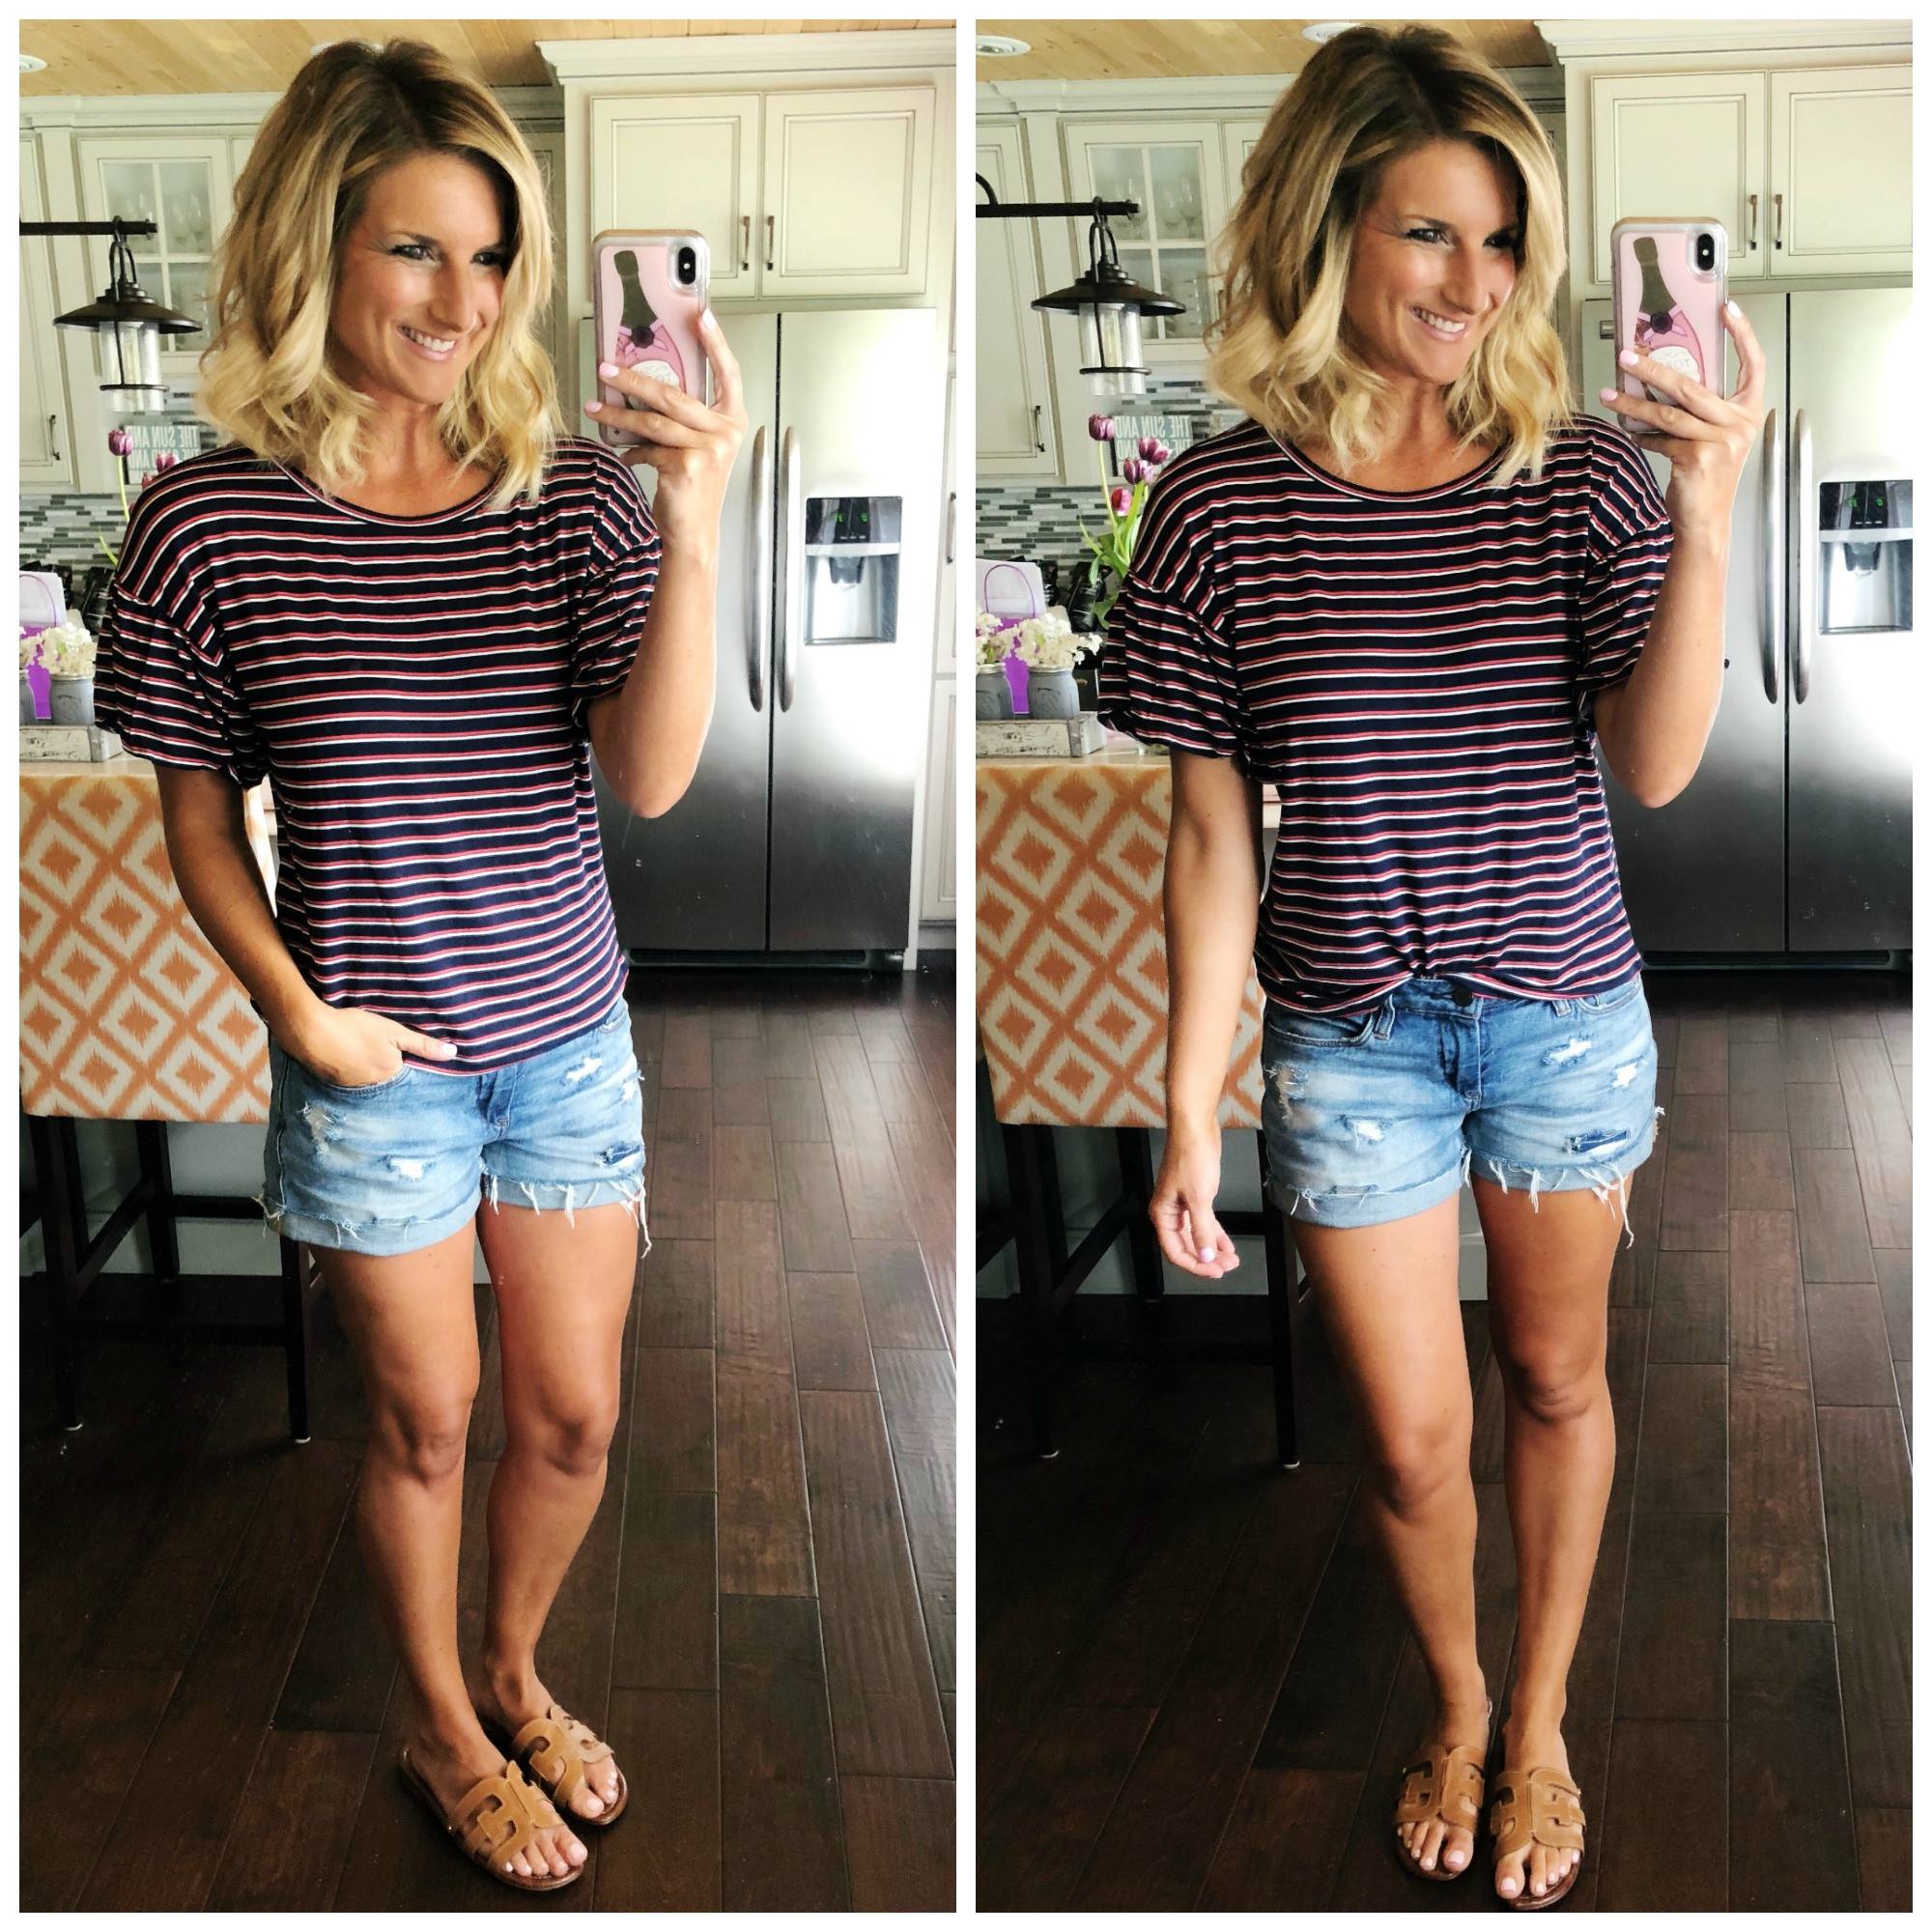 Memorial Day or July 4th Outfit // How to Tuck a shirt into shorts // How to style a striped top